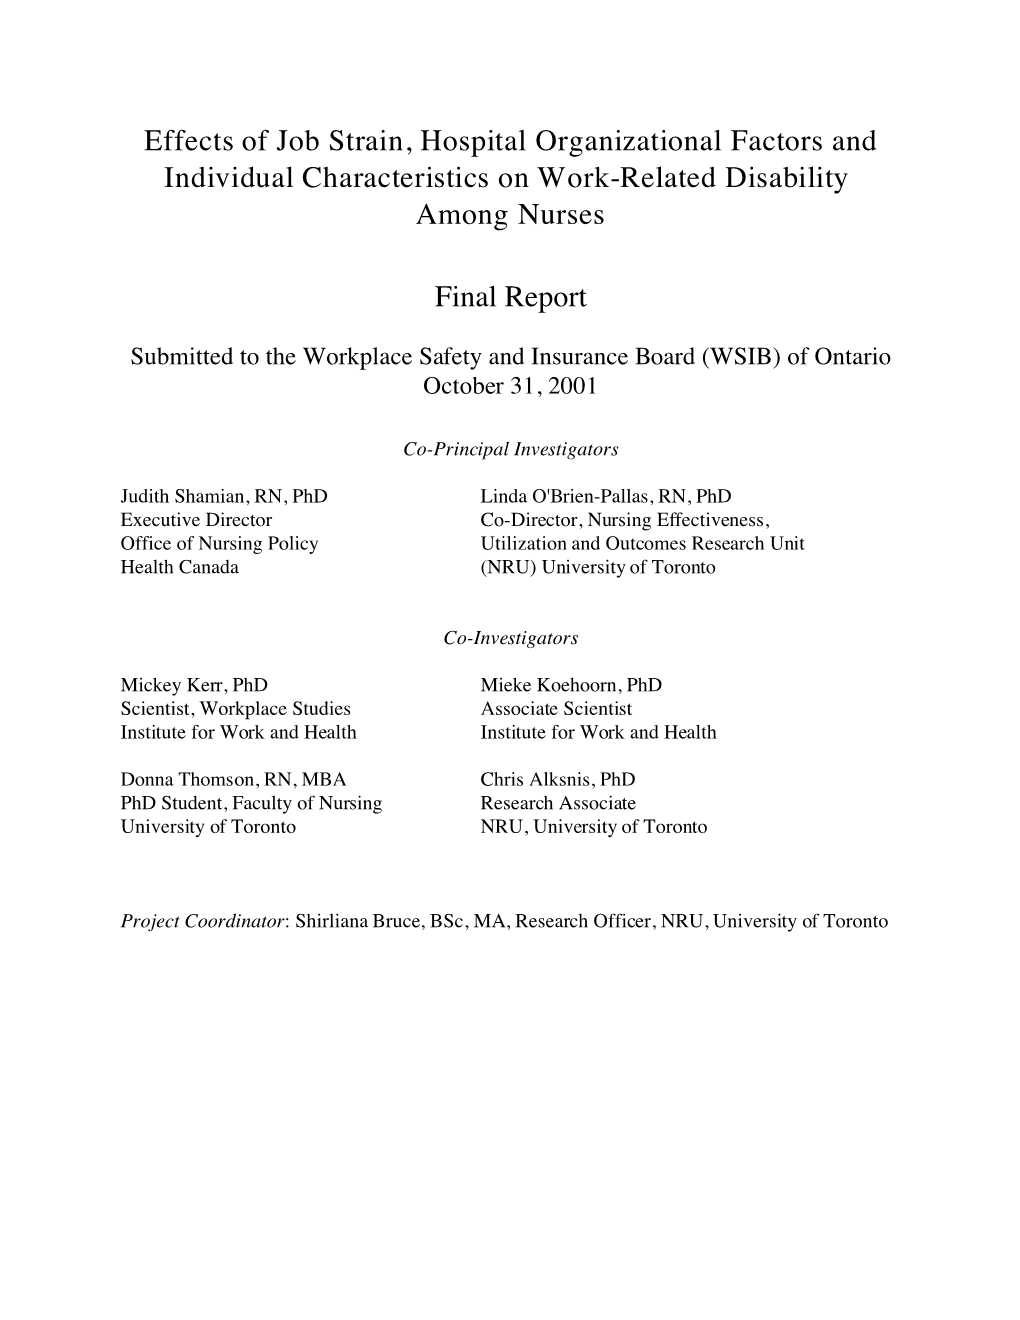 Effects of Job Strain, Hospital Organizational Factors and Individual Characteristics on Work-Related Disability Among Nurses